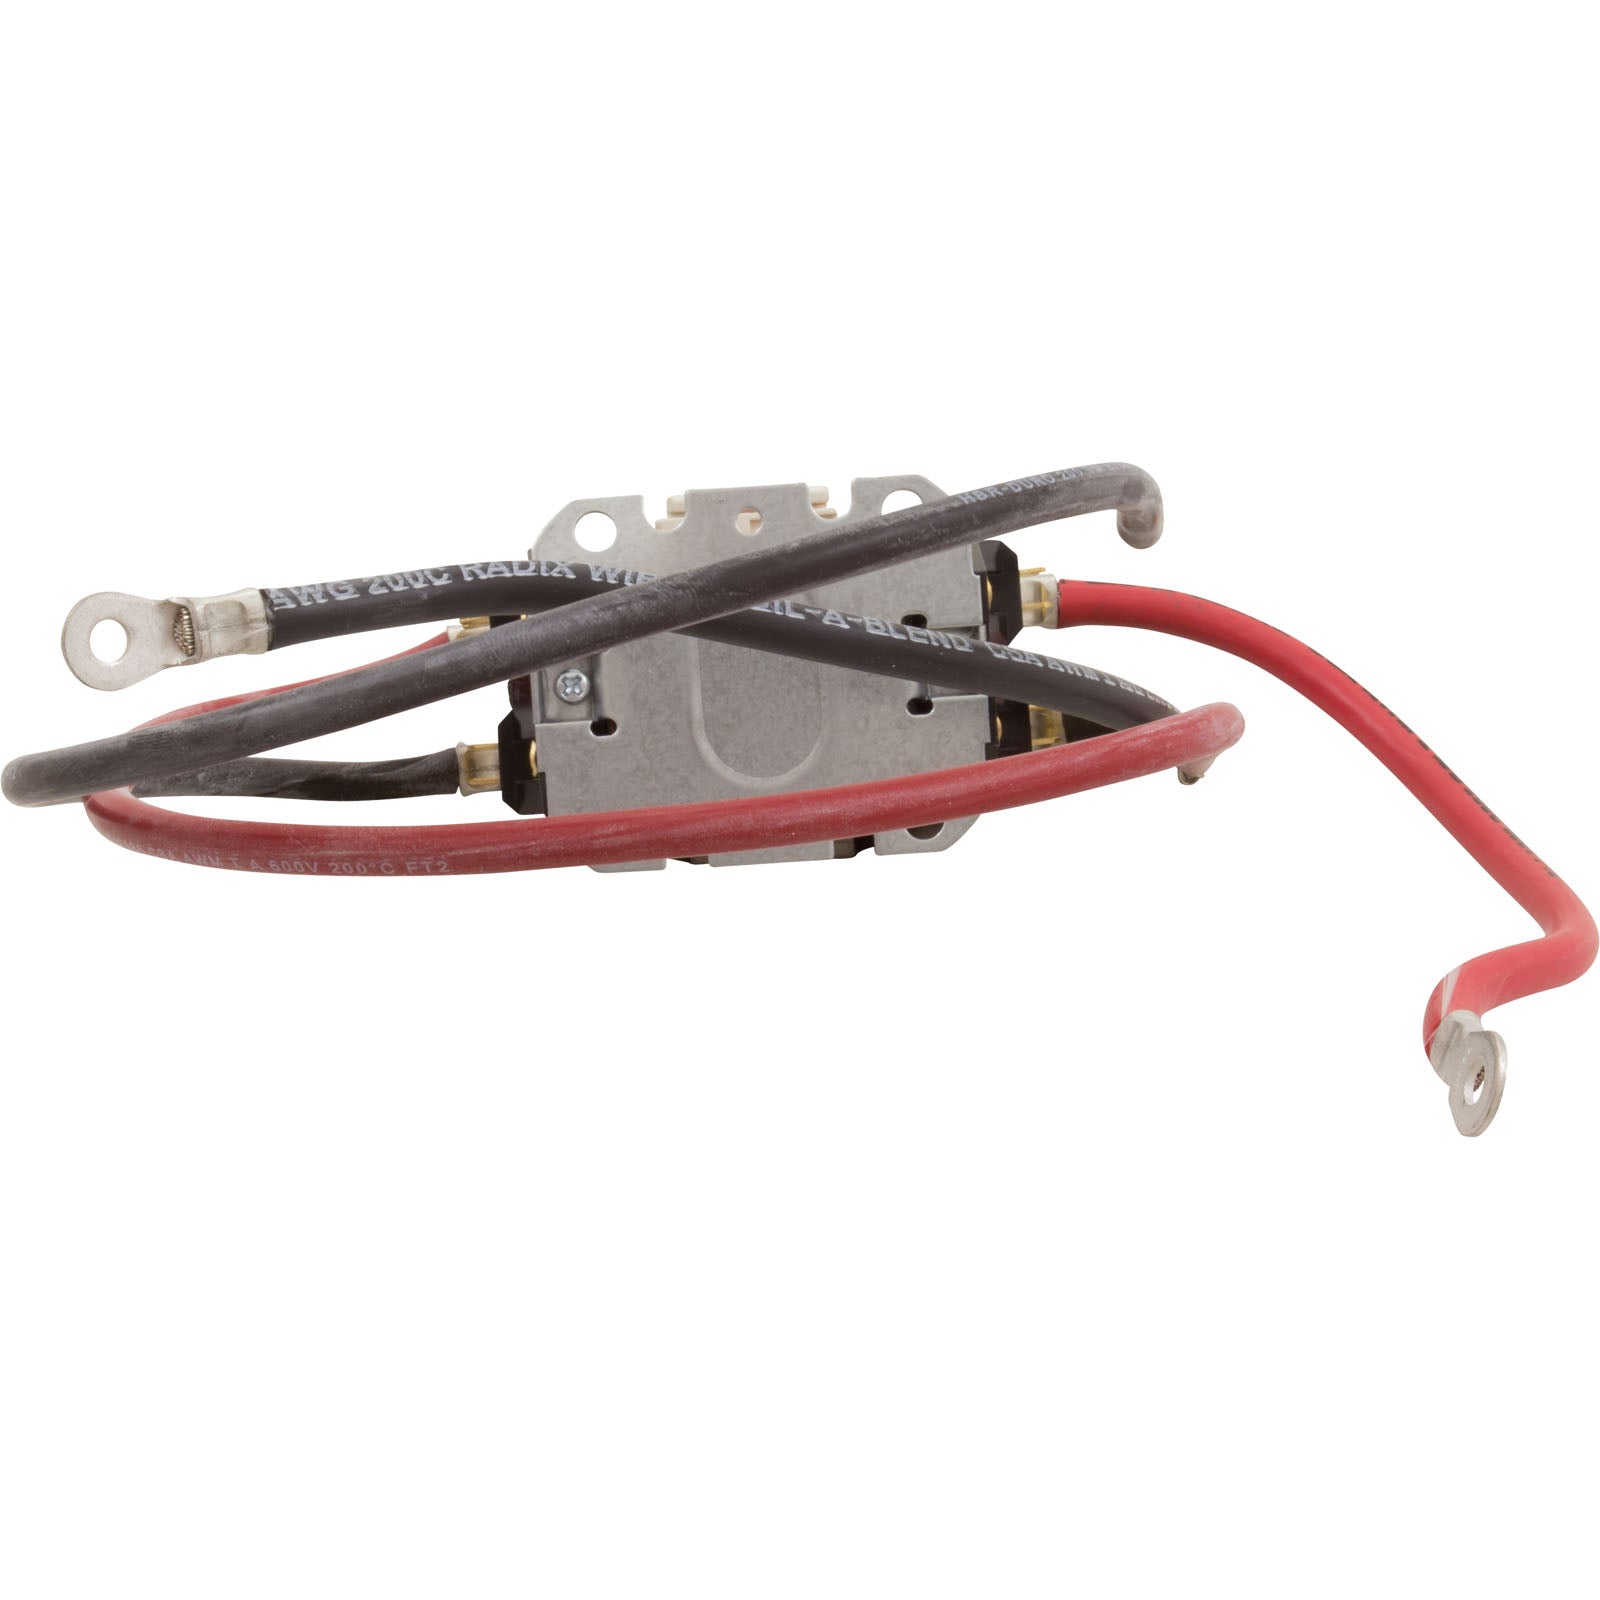 Contactor w/ Wire Kit, Raypak, 001813F